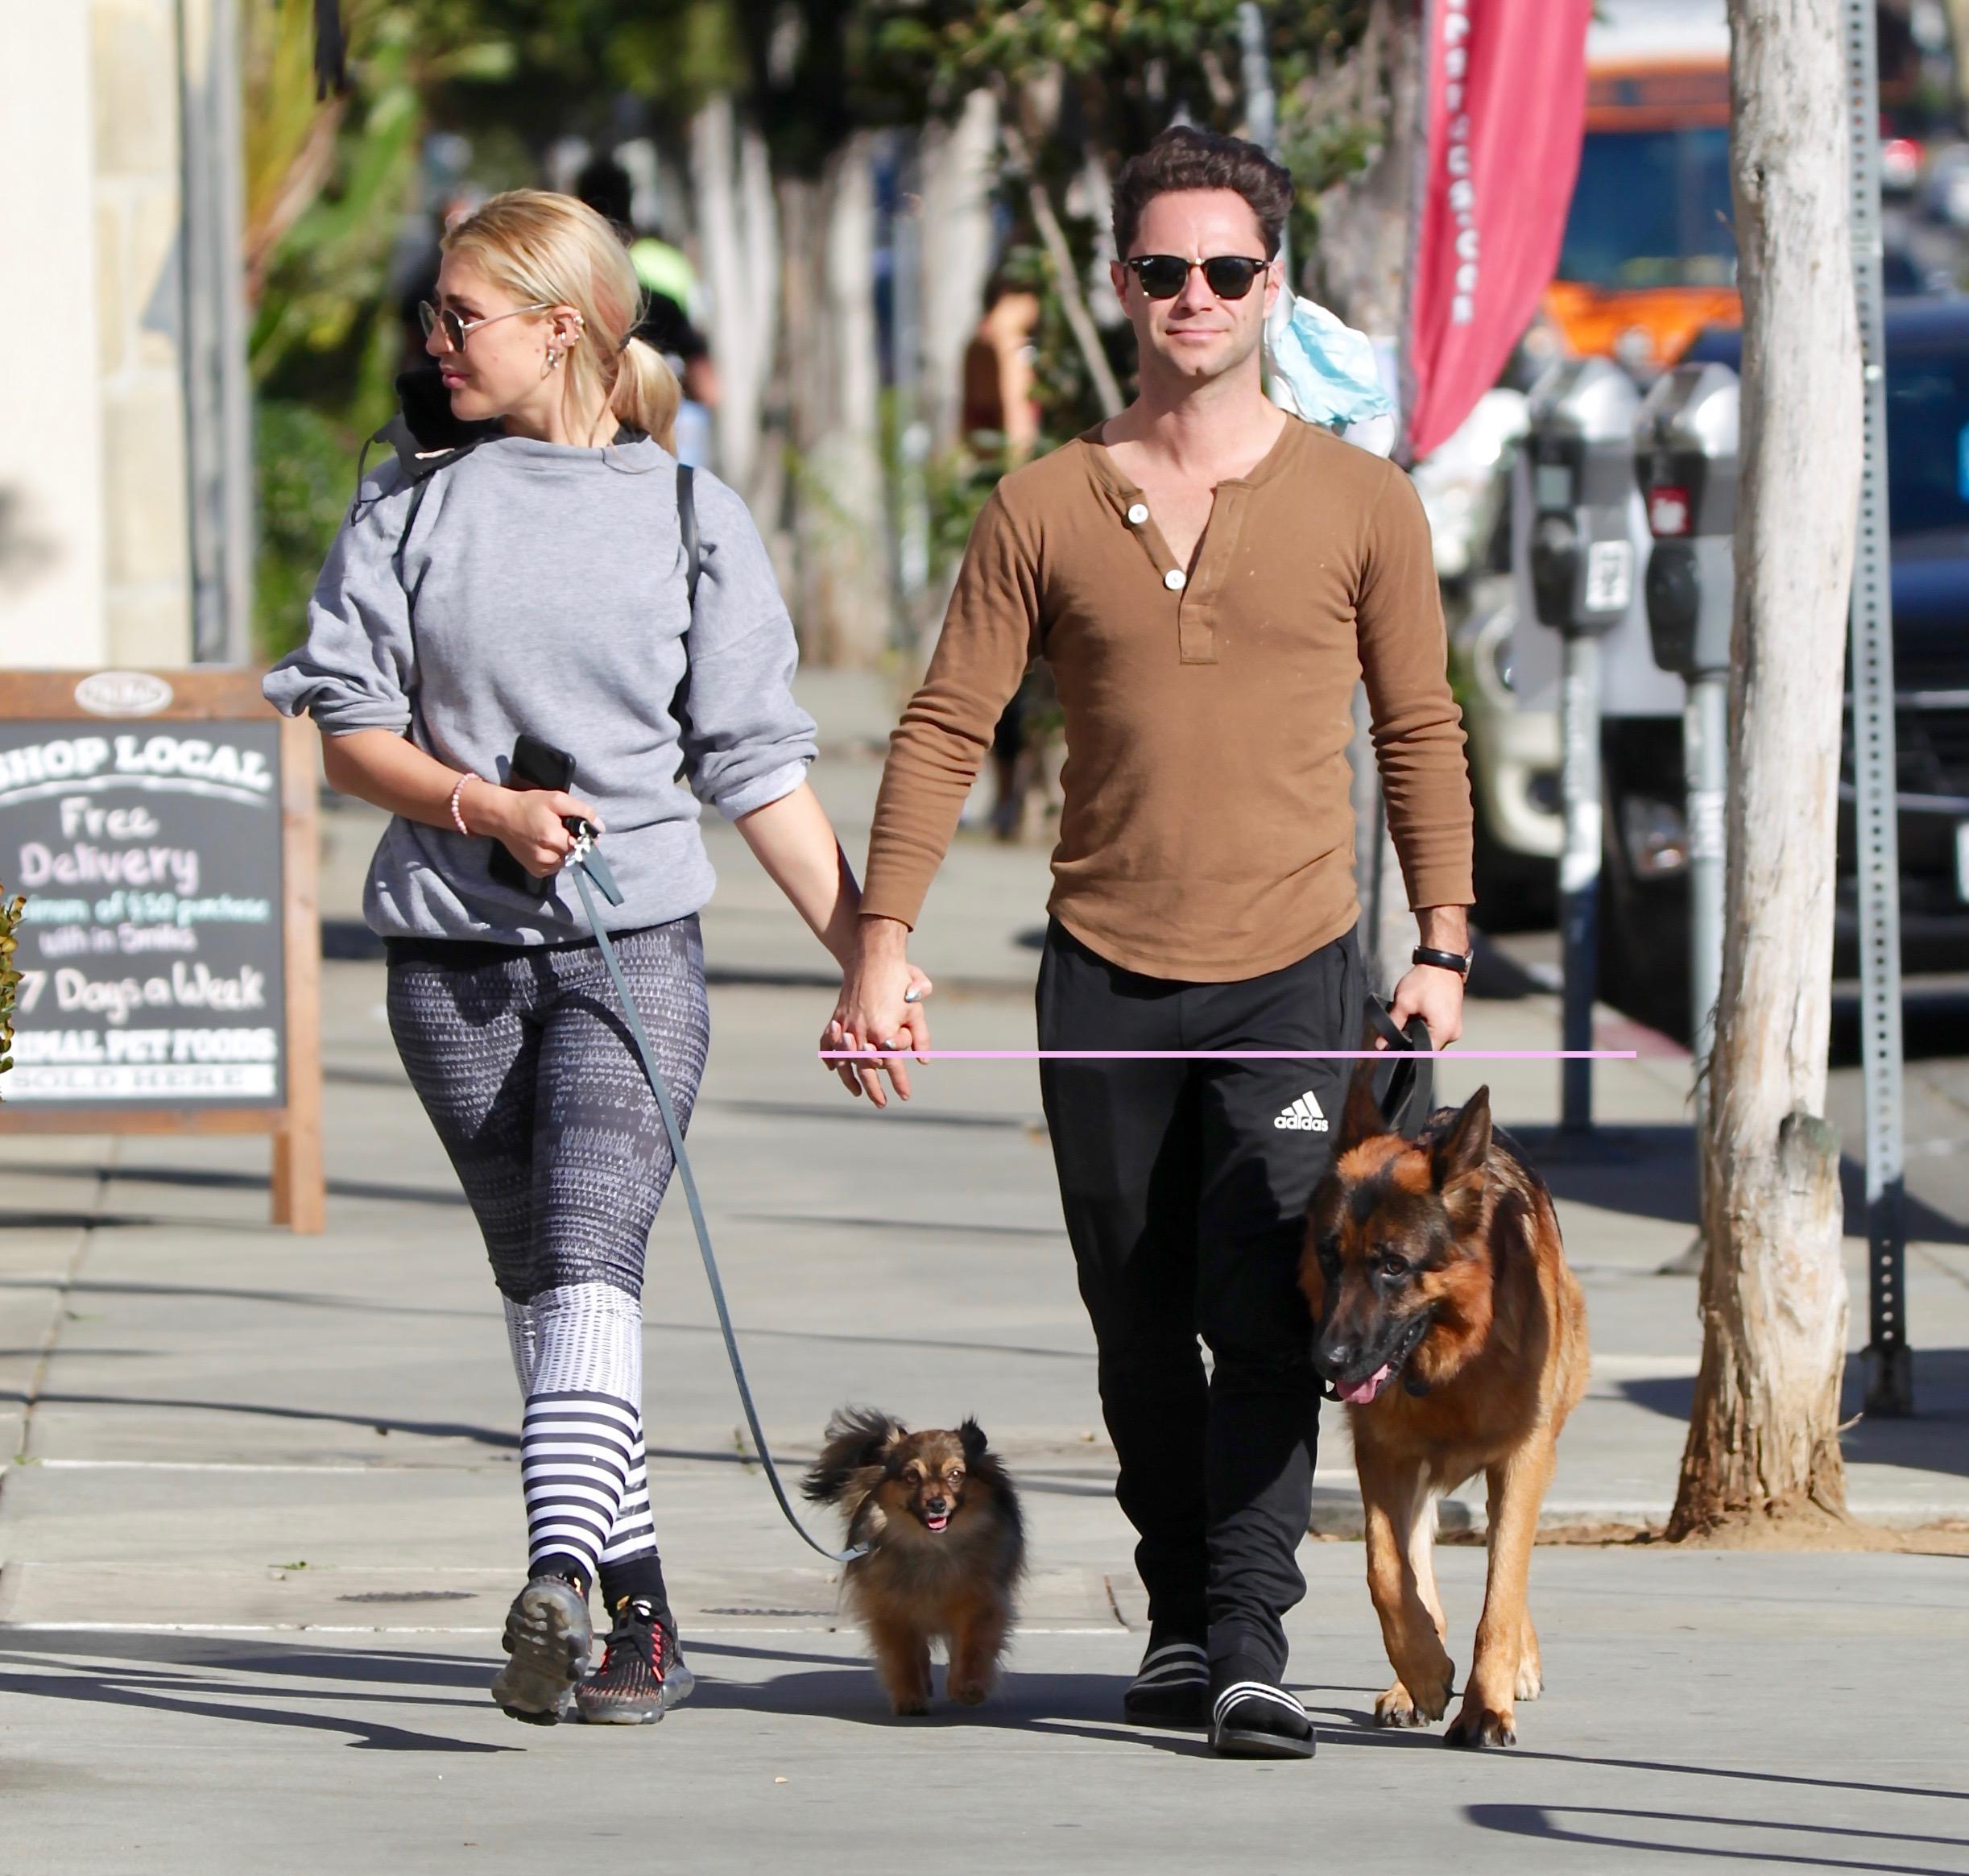 Dancing With the Stars Sasha Farber and Emma Slater take their dogs out for a Sunday coffee run